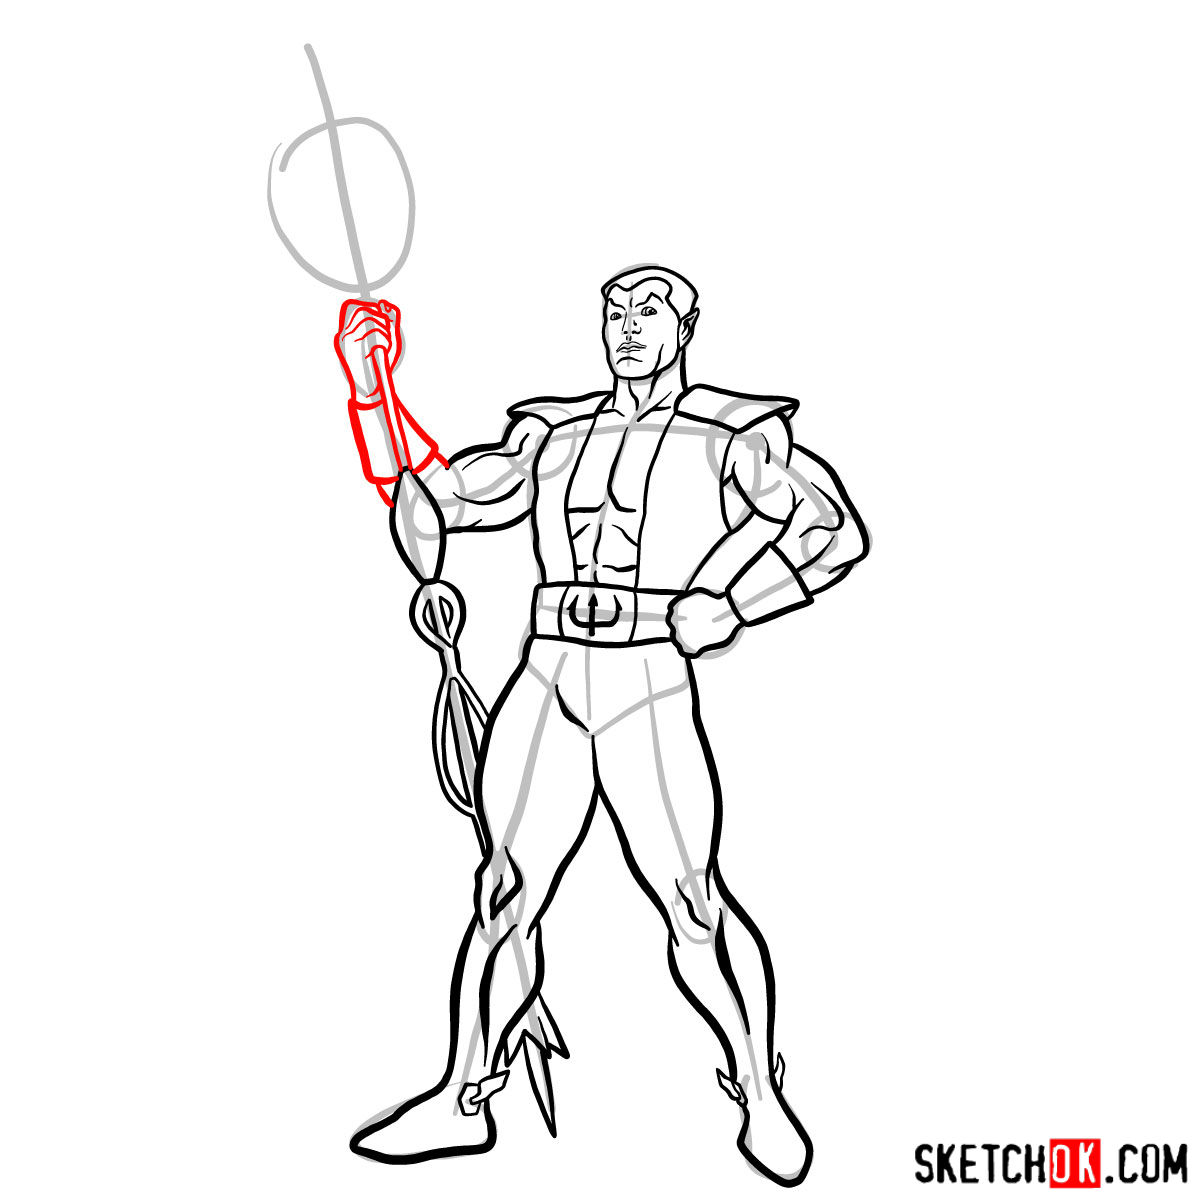 How to draw Namor the Sub-Mariner from Marvel Comics - step 14